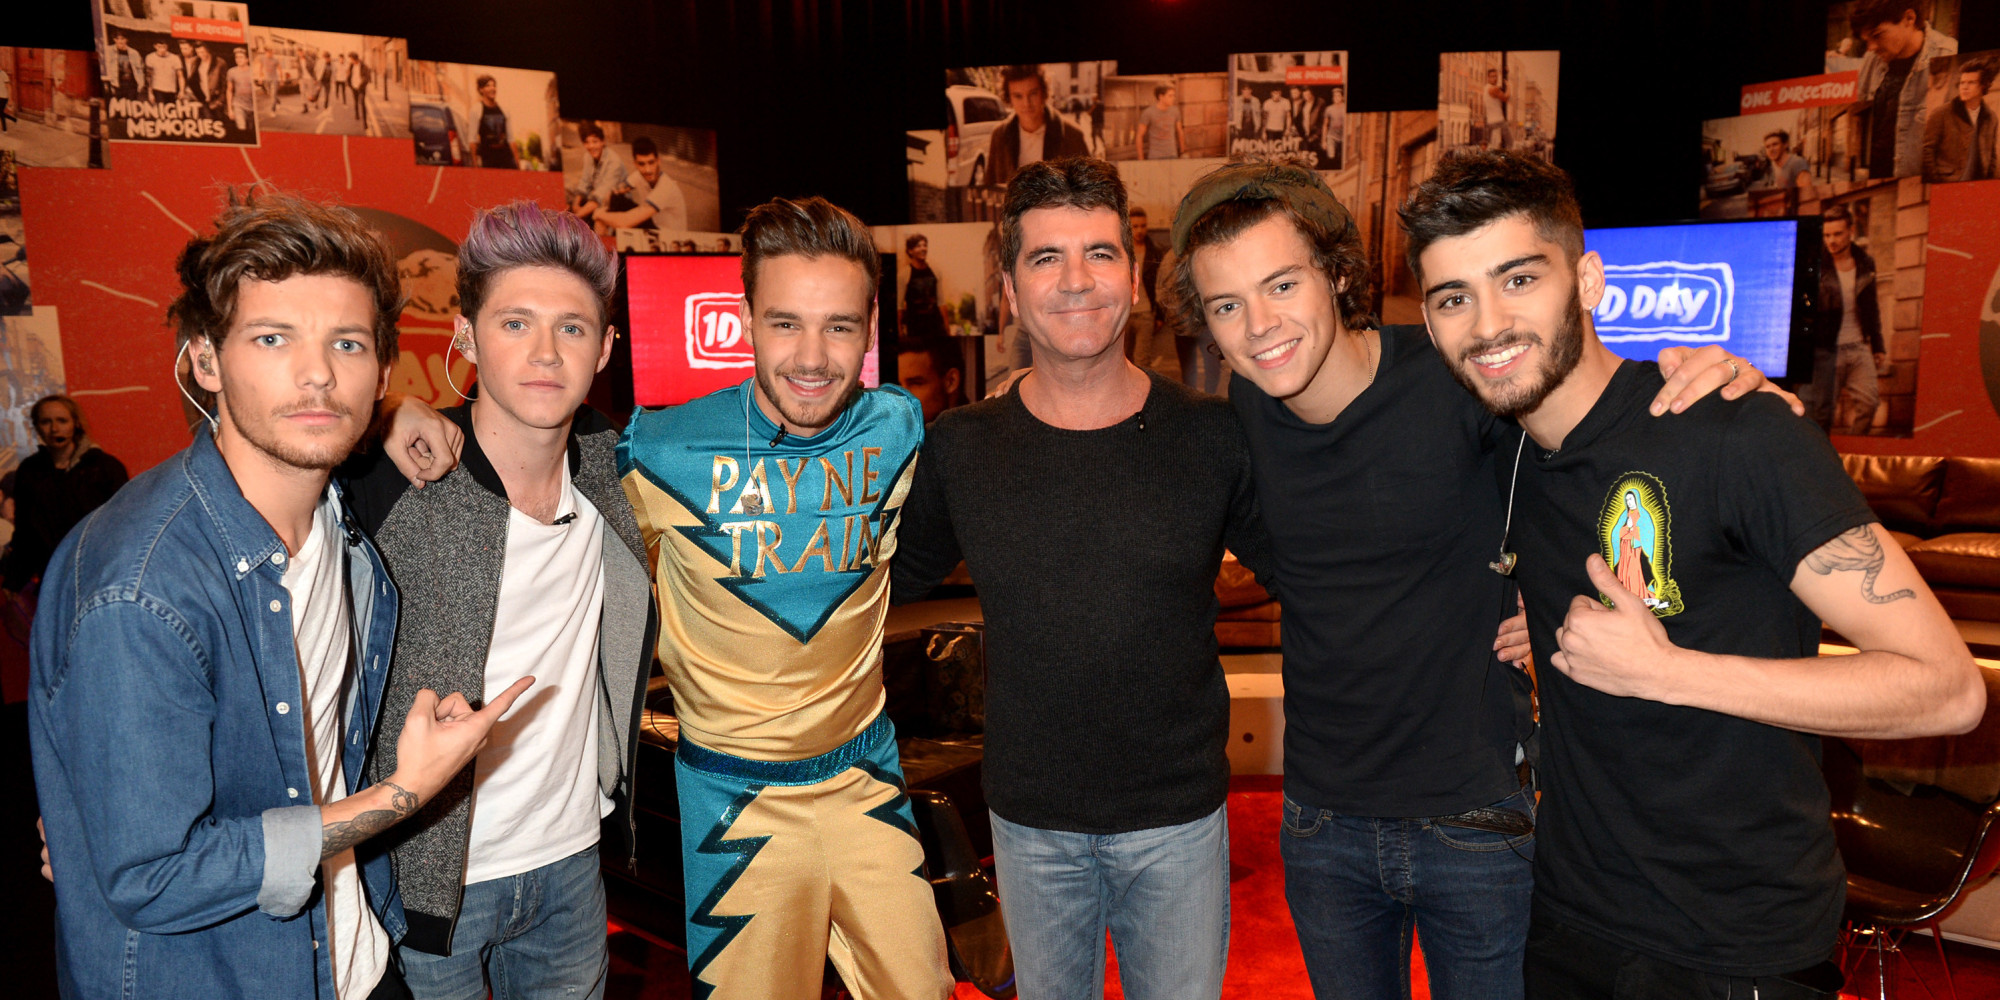 PLAYA VISTA, CA - NOVEMBER 23:  (L-R) Louis Tomlinson, Niall Horan, Liam Payne, Simon Cowell, Harry Styles, and Zayn Malik on set during One Direction celebrates 1D Day at YouTube Space LA, a 7-hour livestream event broadcast exclusively on YouTube and Google+. Featuring behind the scenes footage, Guinness world record attempts, and amazing special guests, the global event also marked the premiere of tracks from their new album 'Midnight Memories', set for release November 25th, in Playa Vista, California on November 23, 2013  (Photo by Jeff Kravitz/FilmMagic)